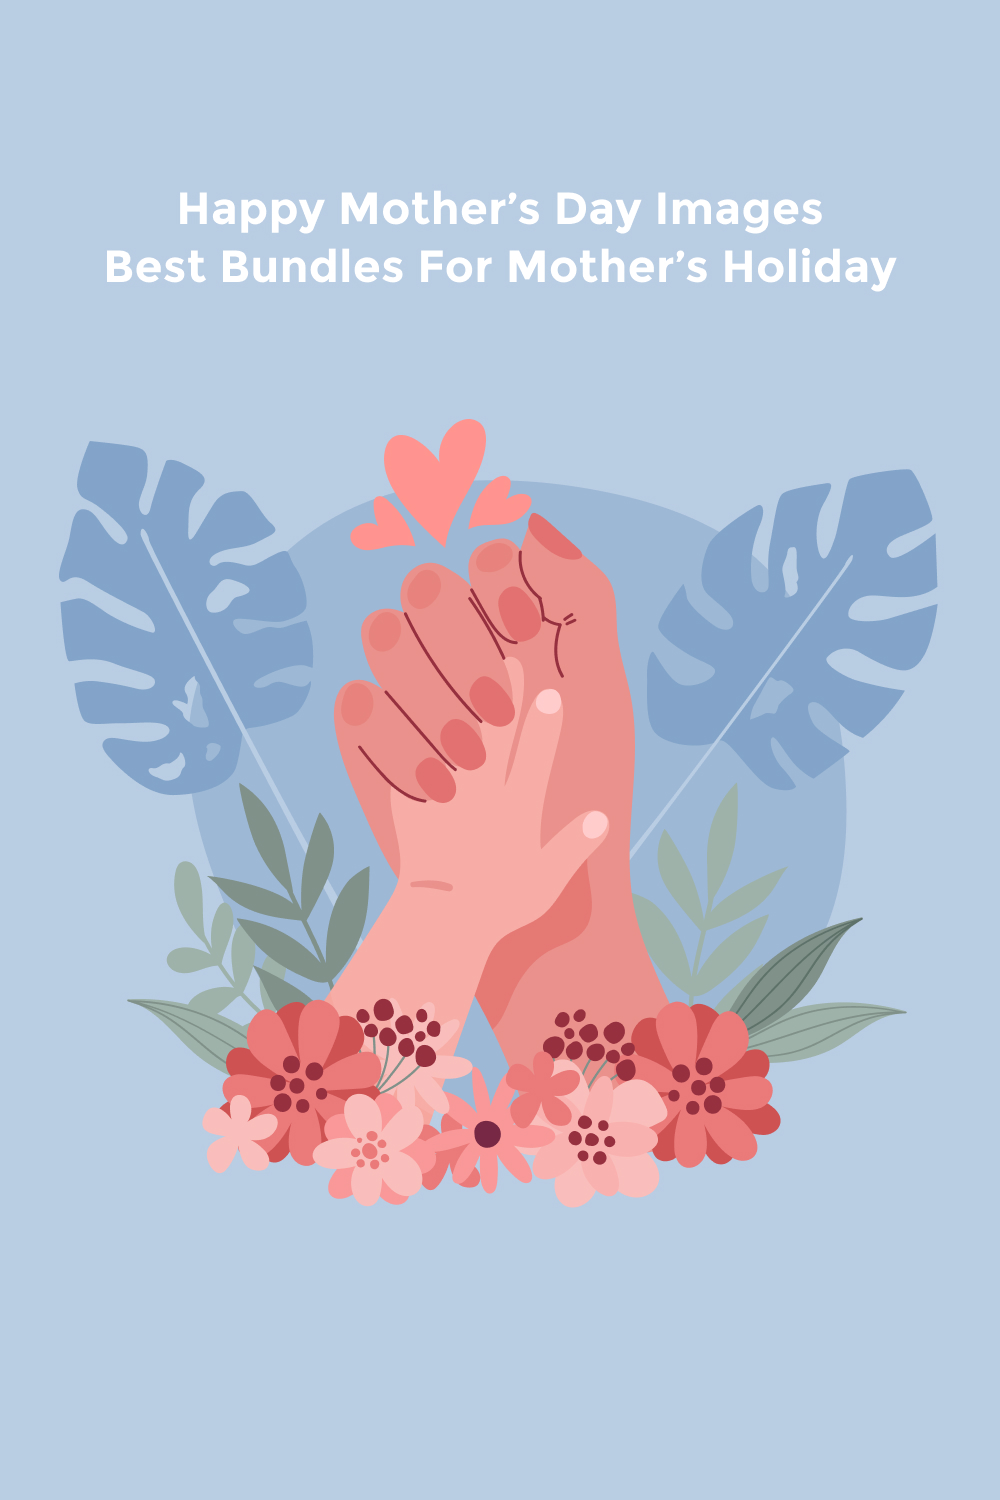 happy mothers day images best bundles for mothers holiday pinterest.